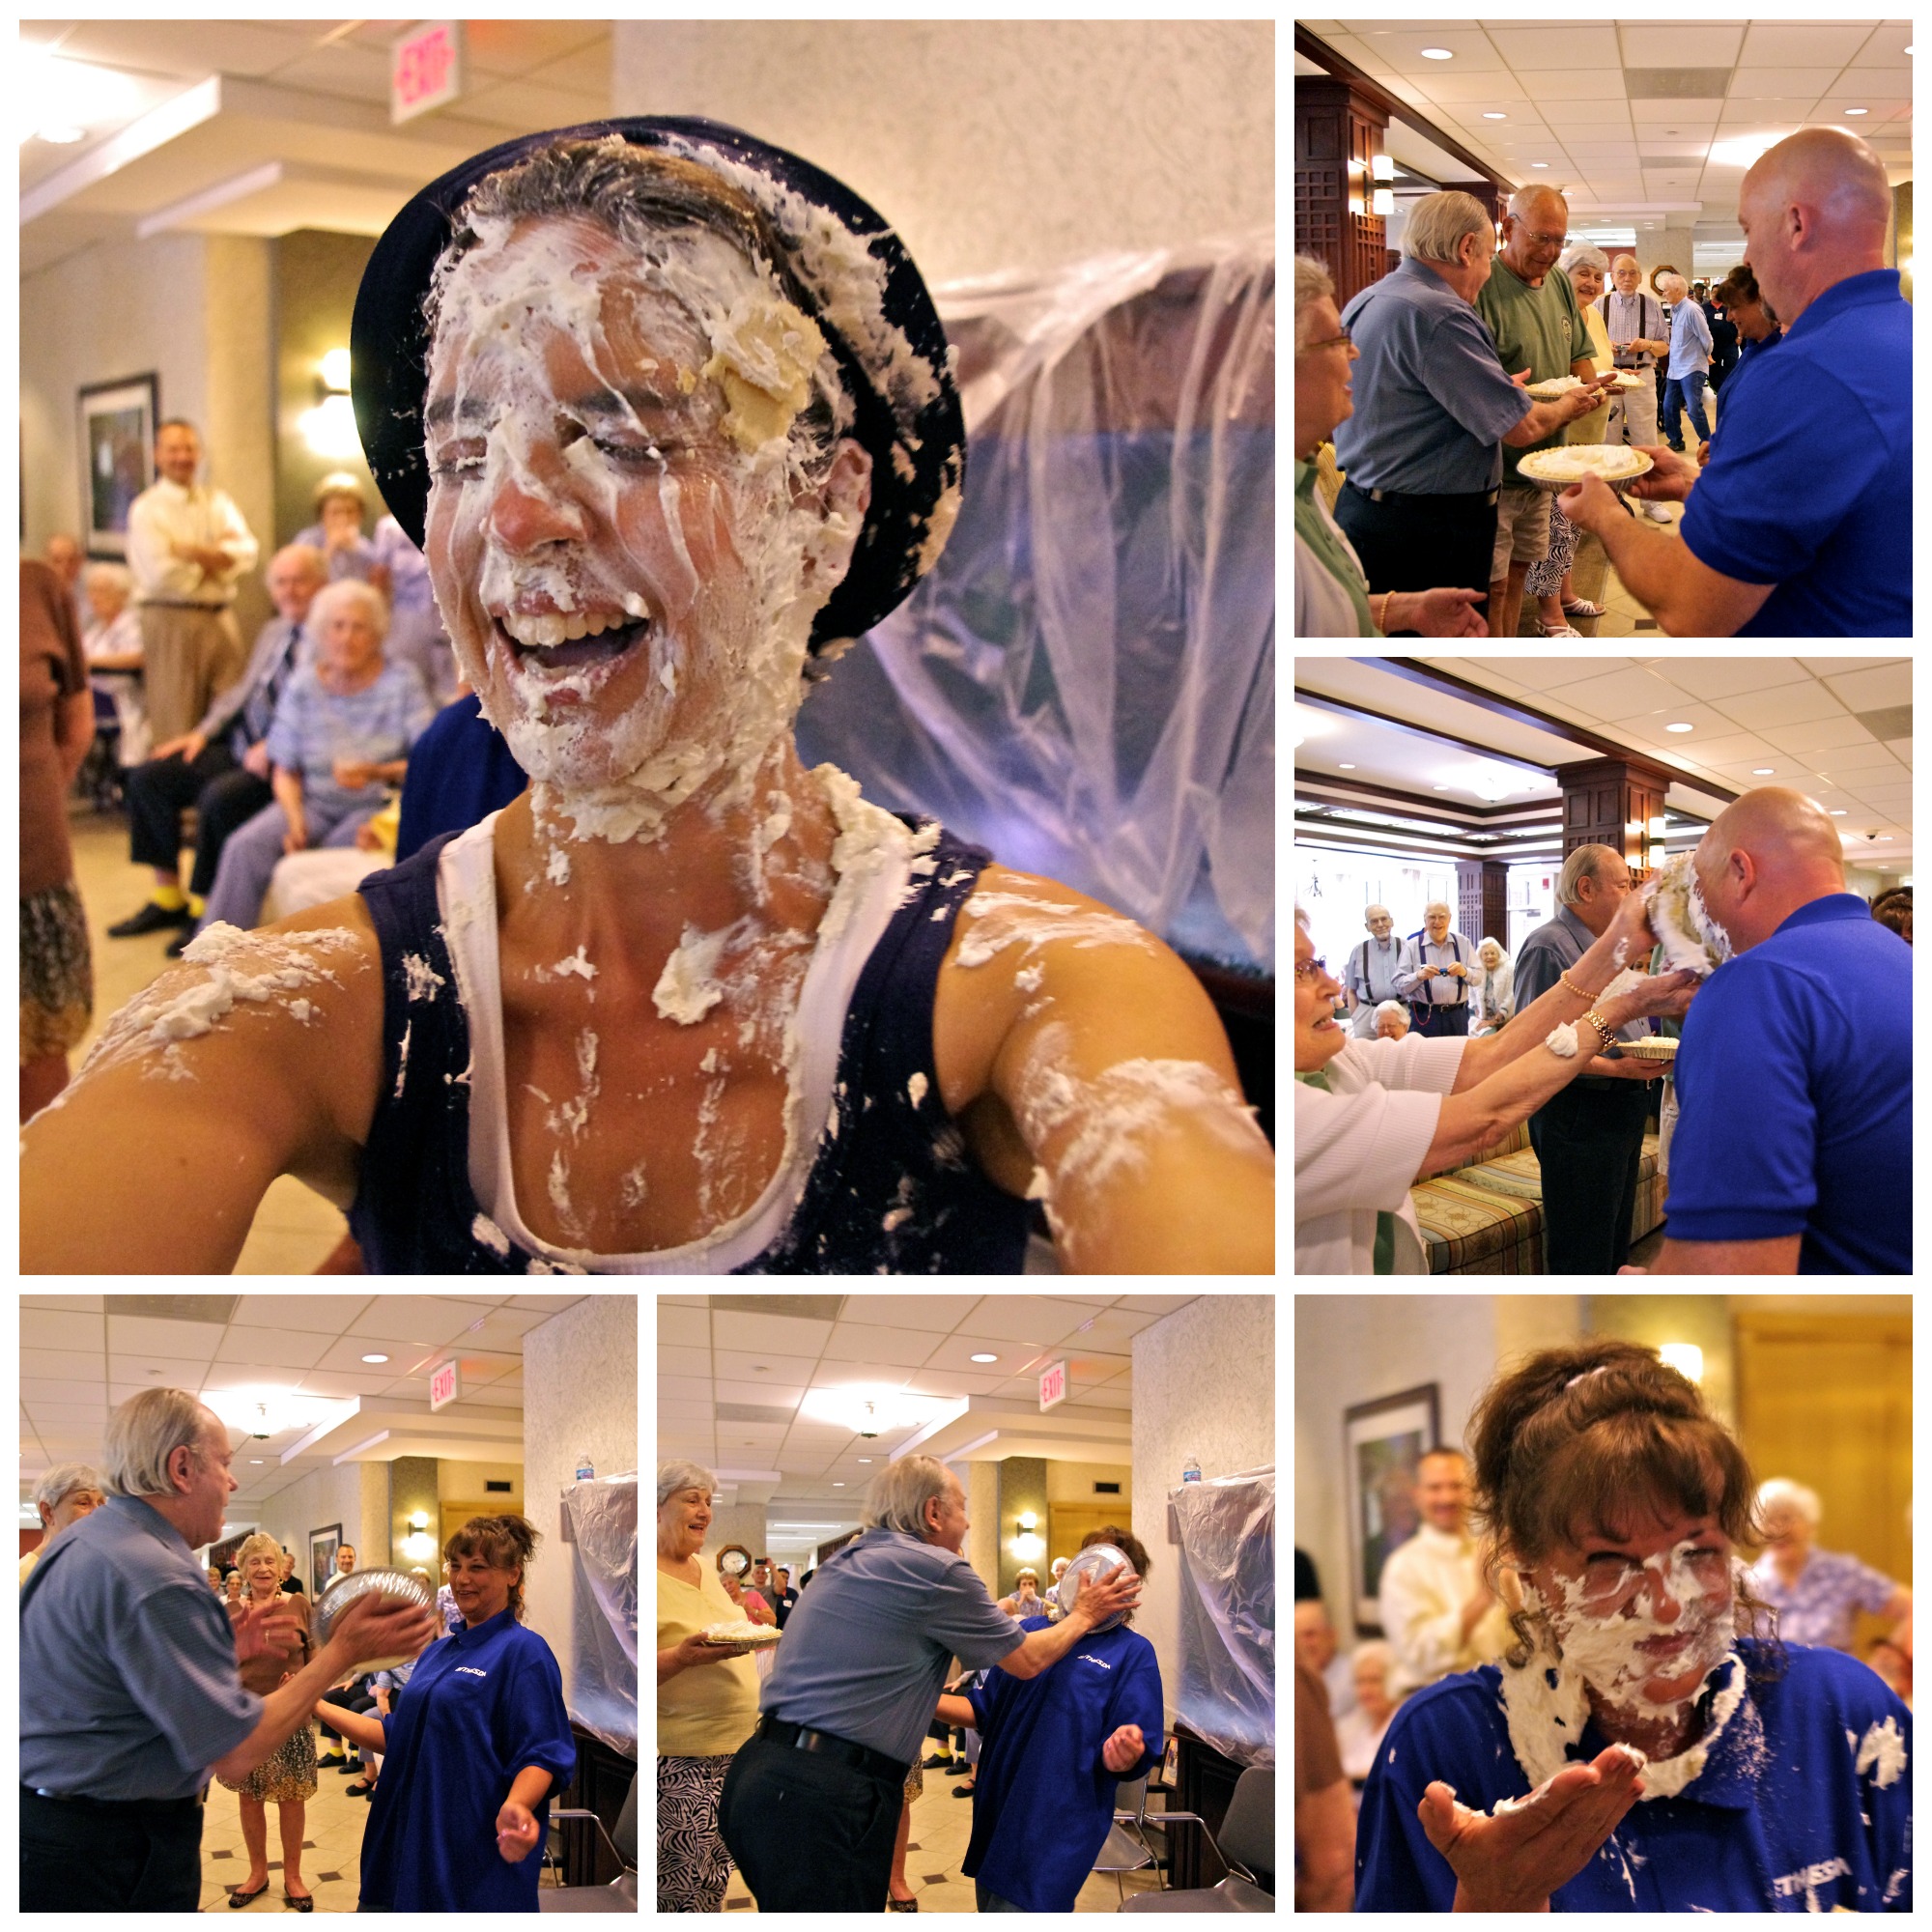 Stepping up to receive a pie in the face. 